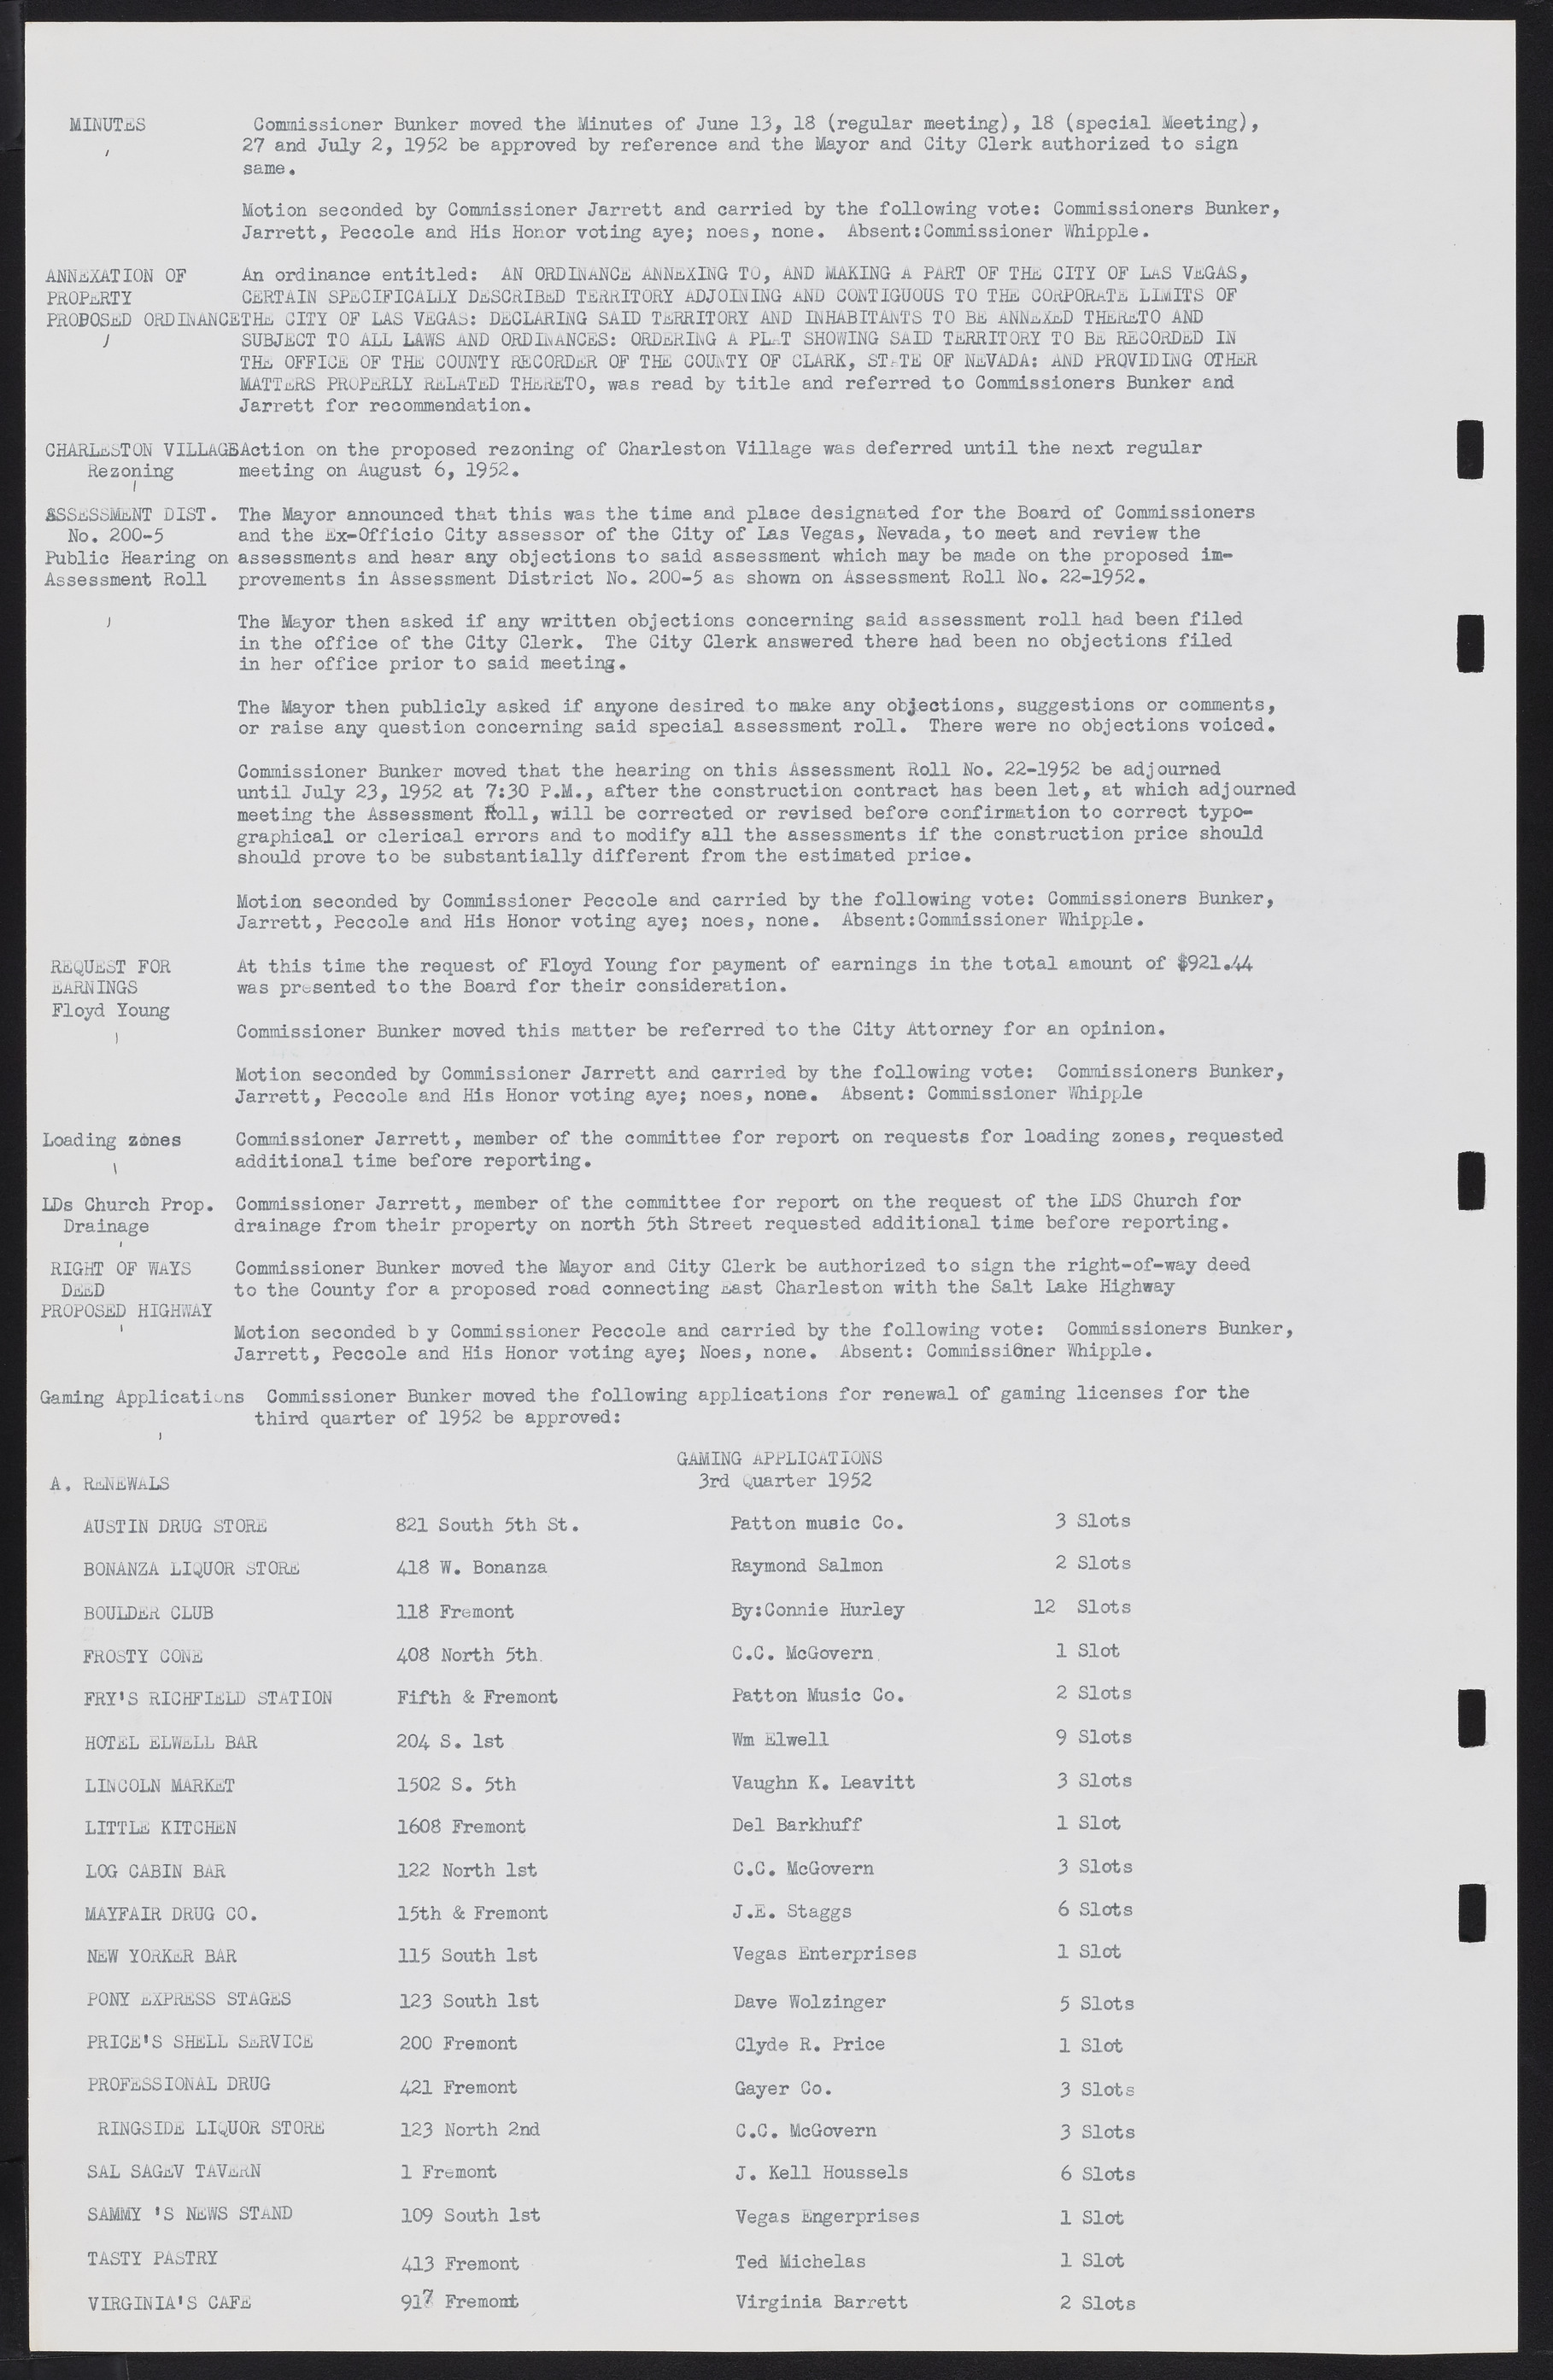 Las Vegas City Commission Minutes, May 26, 1952 to February 17, 1954, lvc000008-130